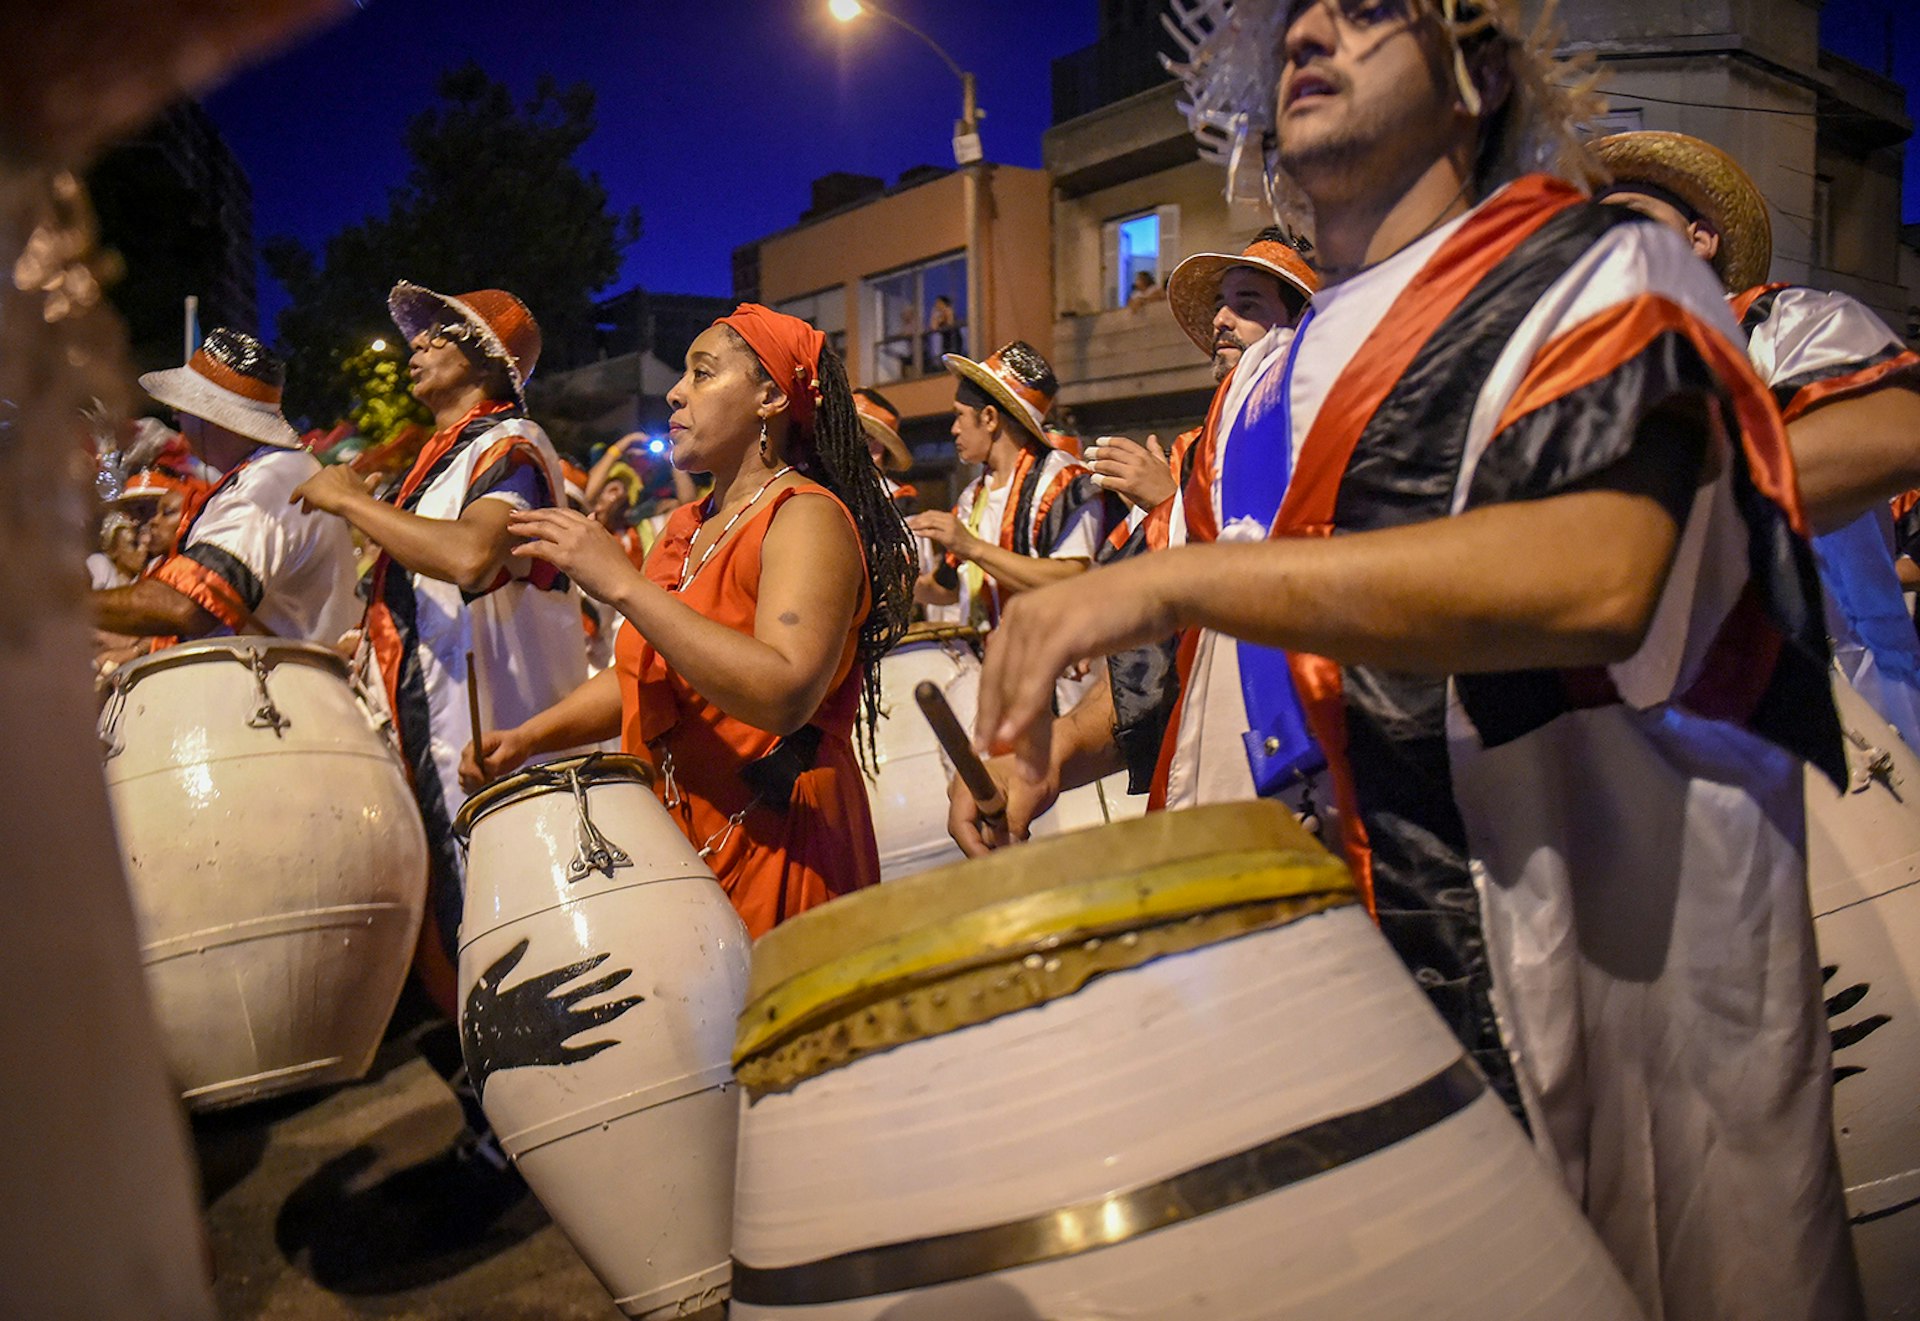 A group of people clad in orange, black and white robes play large white drums